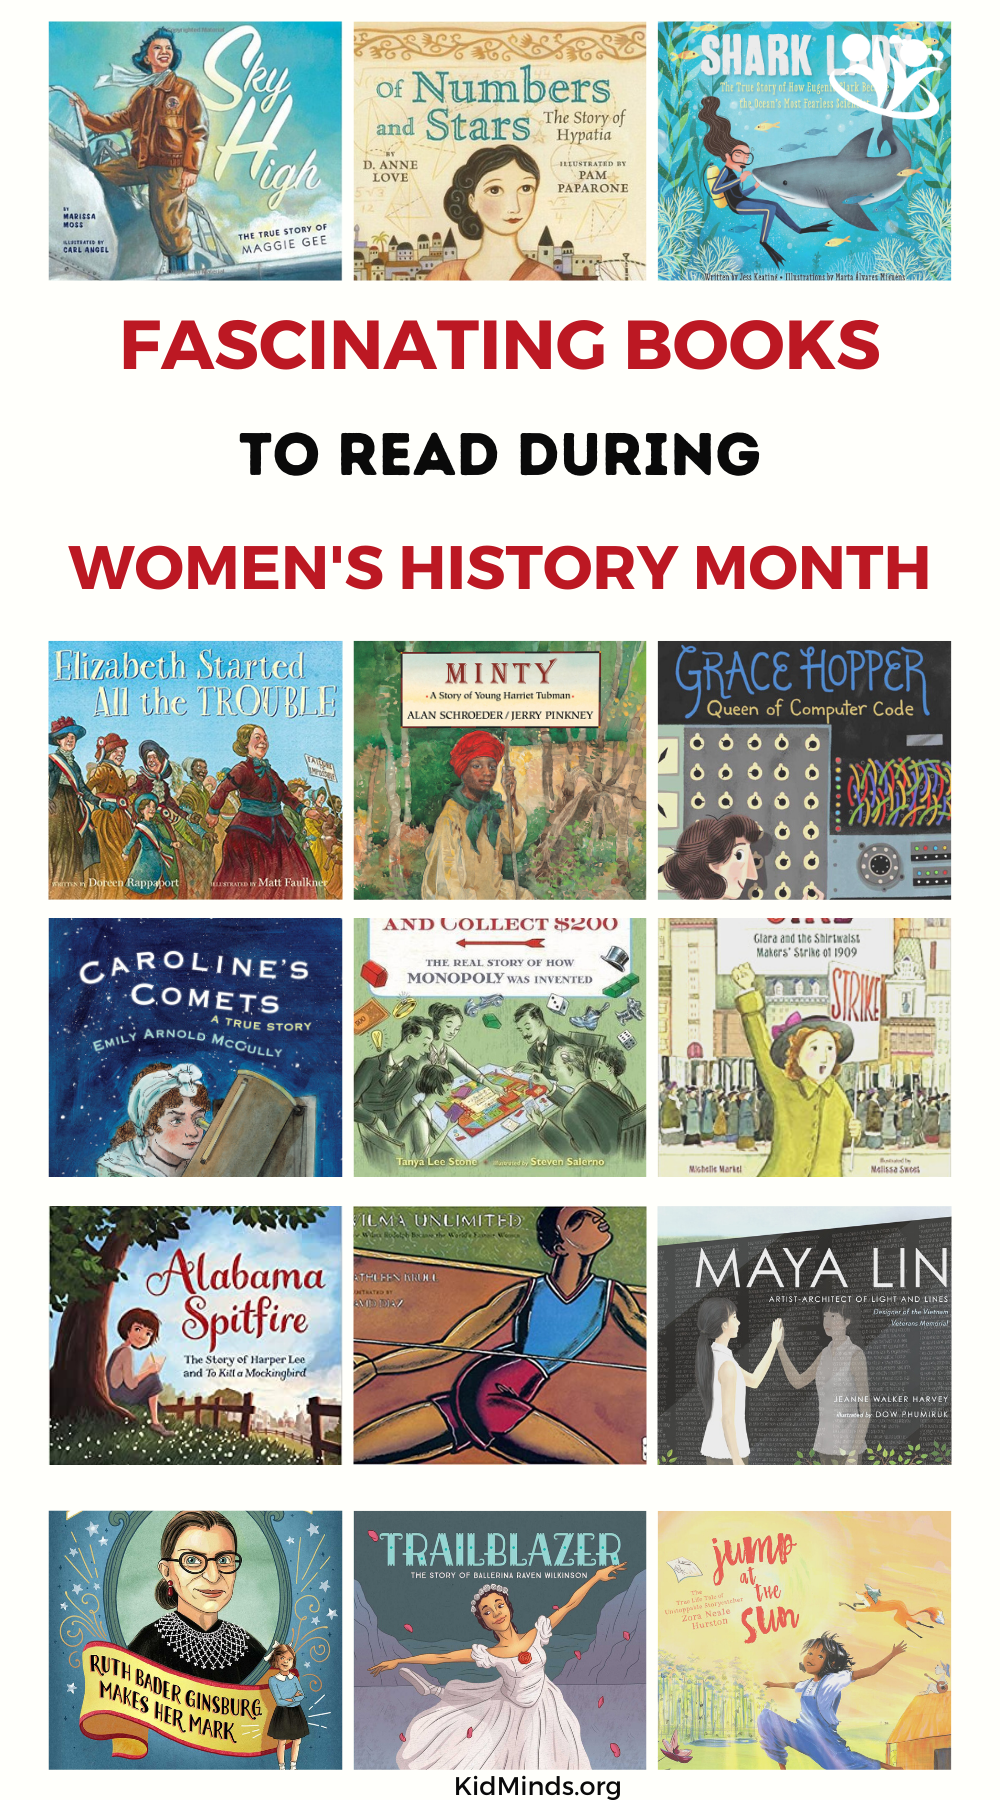 Amazing picture books to read during women's history month to educate our kids and spark some juicy discussions. #kidlit #readinglist #raisingreaders #kidminds #picturebooks